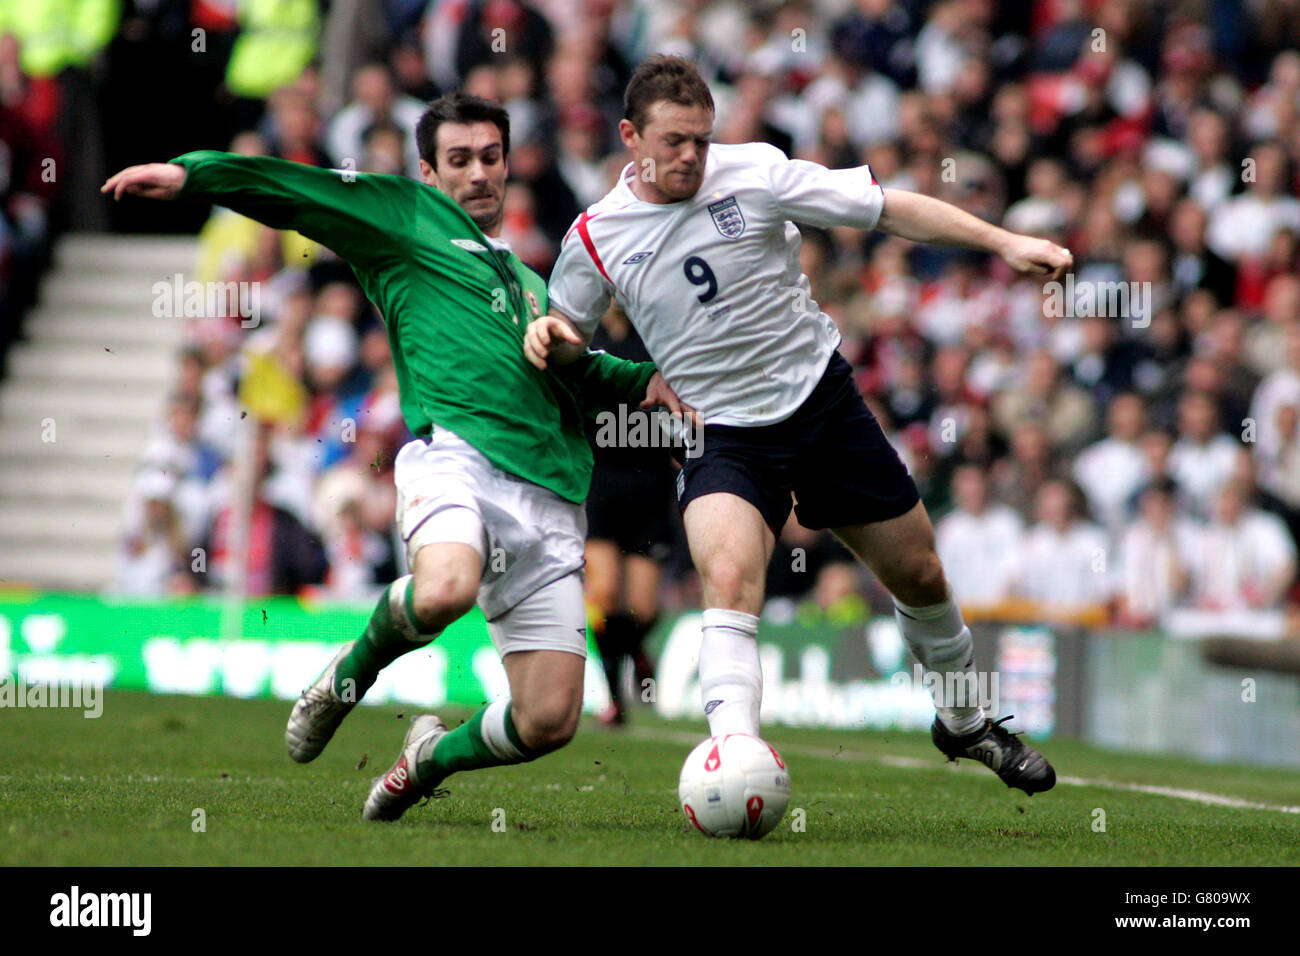 Soccer - FIFA World Cup 2006 Qualifier - Group Six - England v Northern Ireland - Old Trafford. England's Wayne Rooney and Northern Ireland's Keith Gillespie Stock Photo